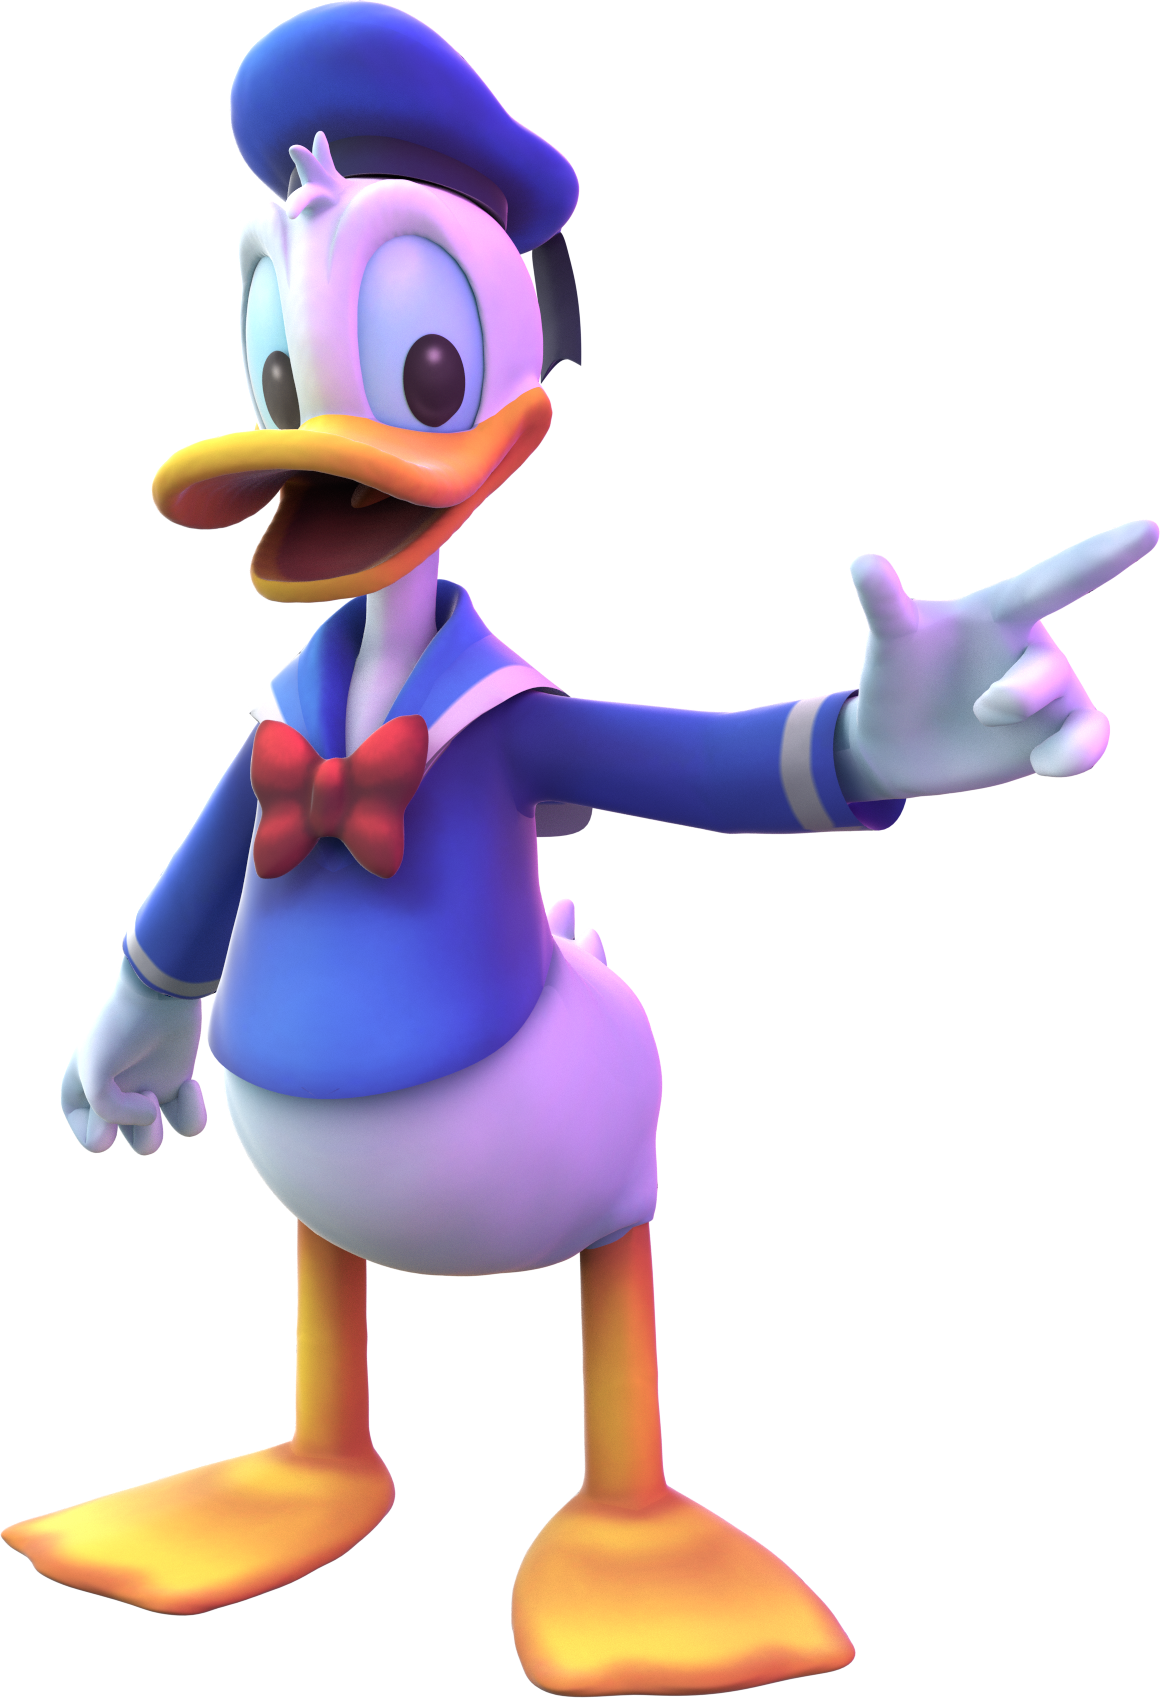 Donald duck png images. Duckling clipart baby boy